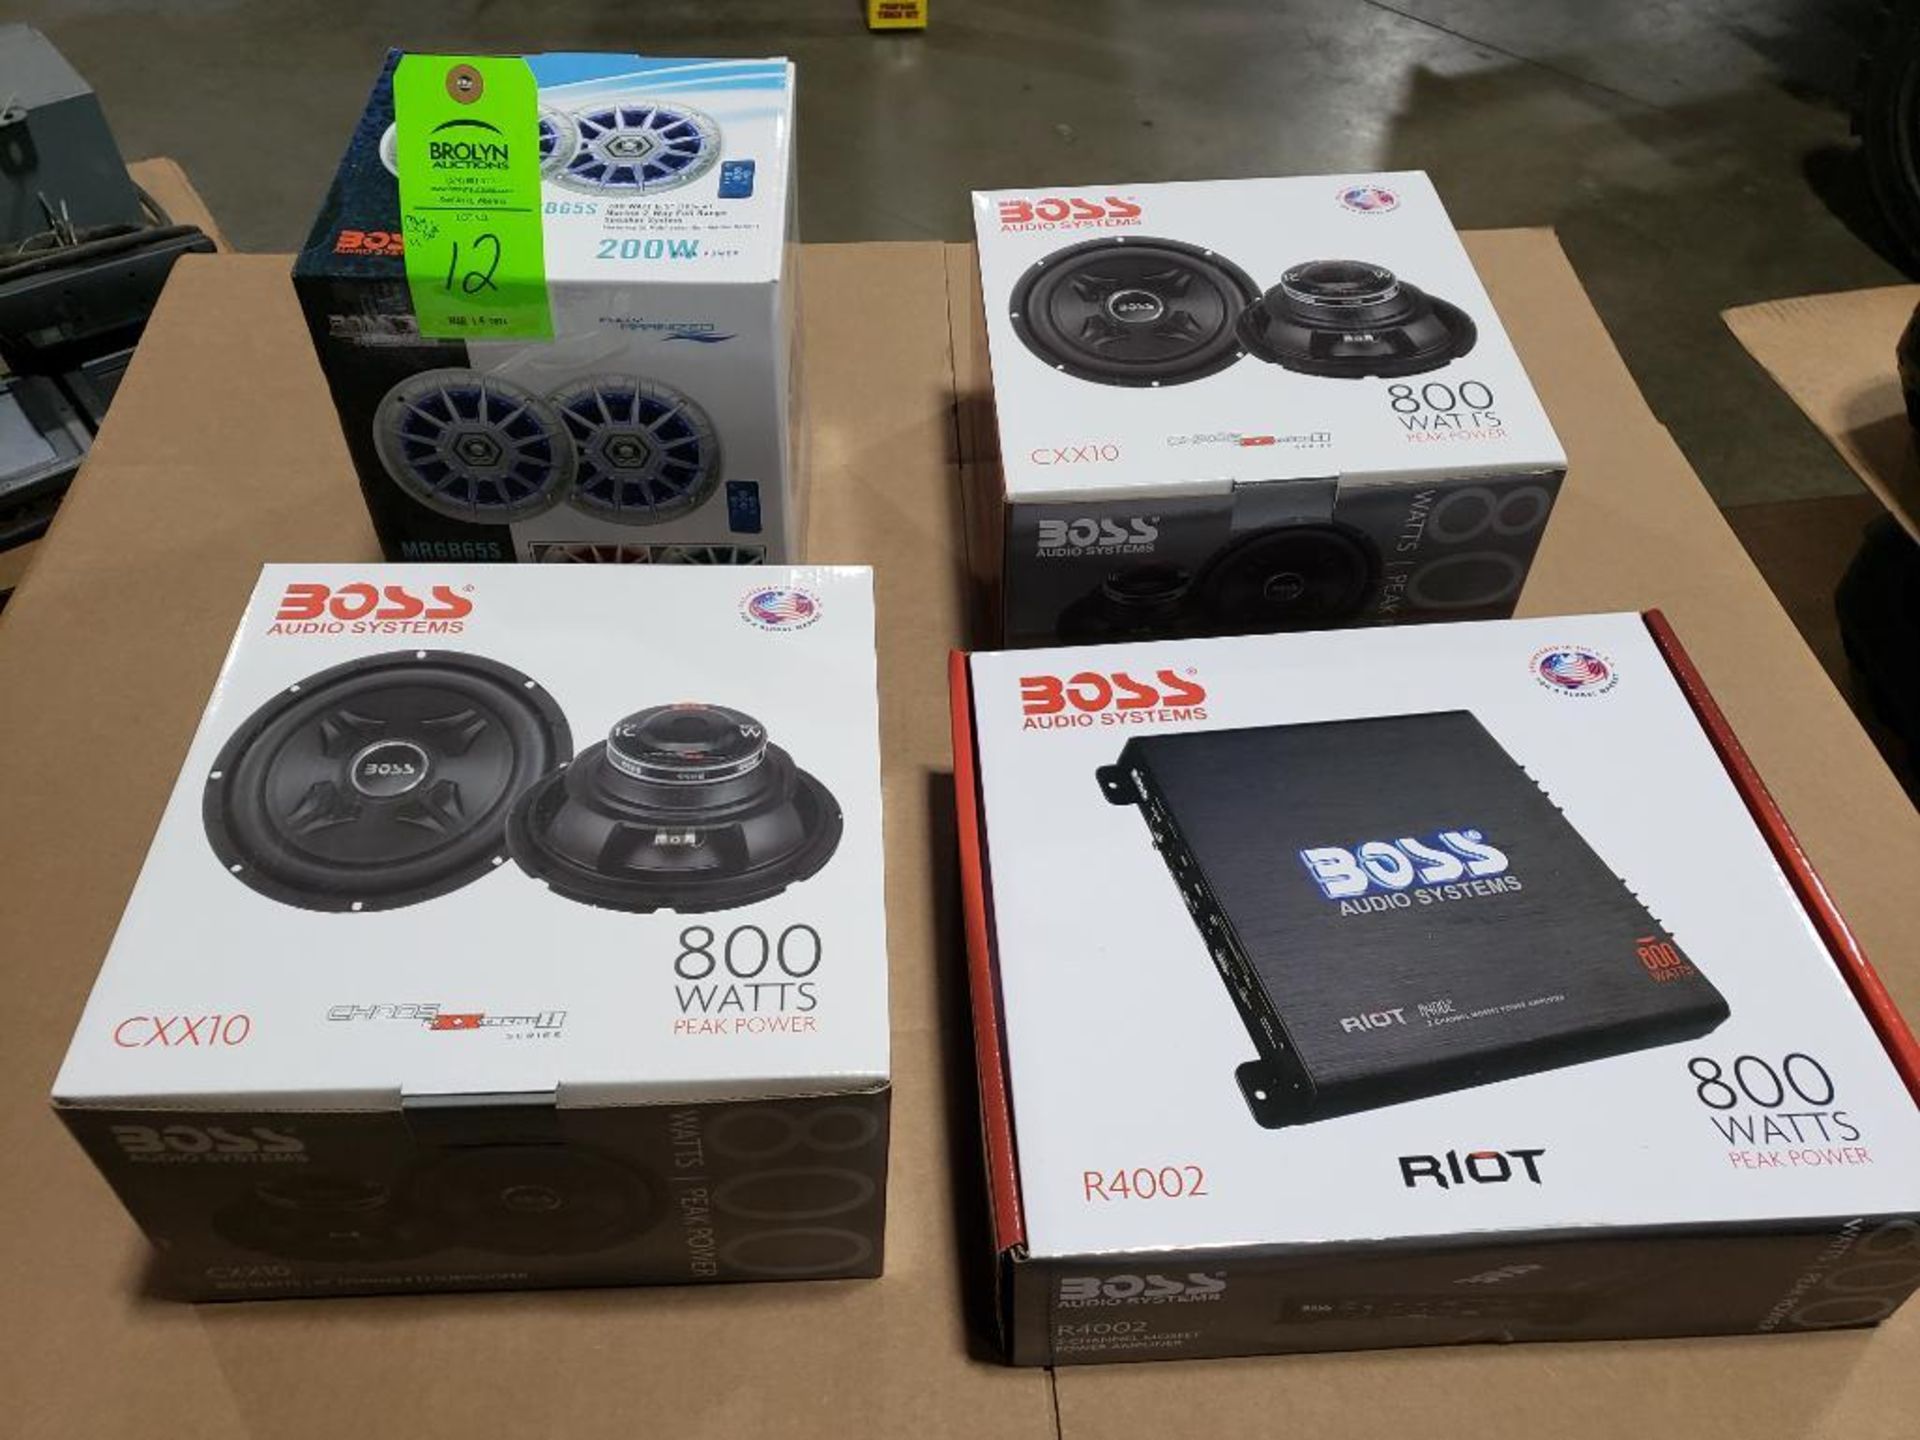 Qty 4 - 3 pairs of assorted Boss speakers and one Boss amp.